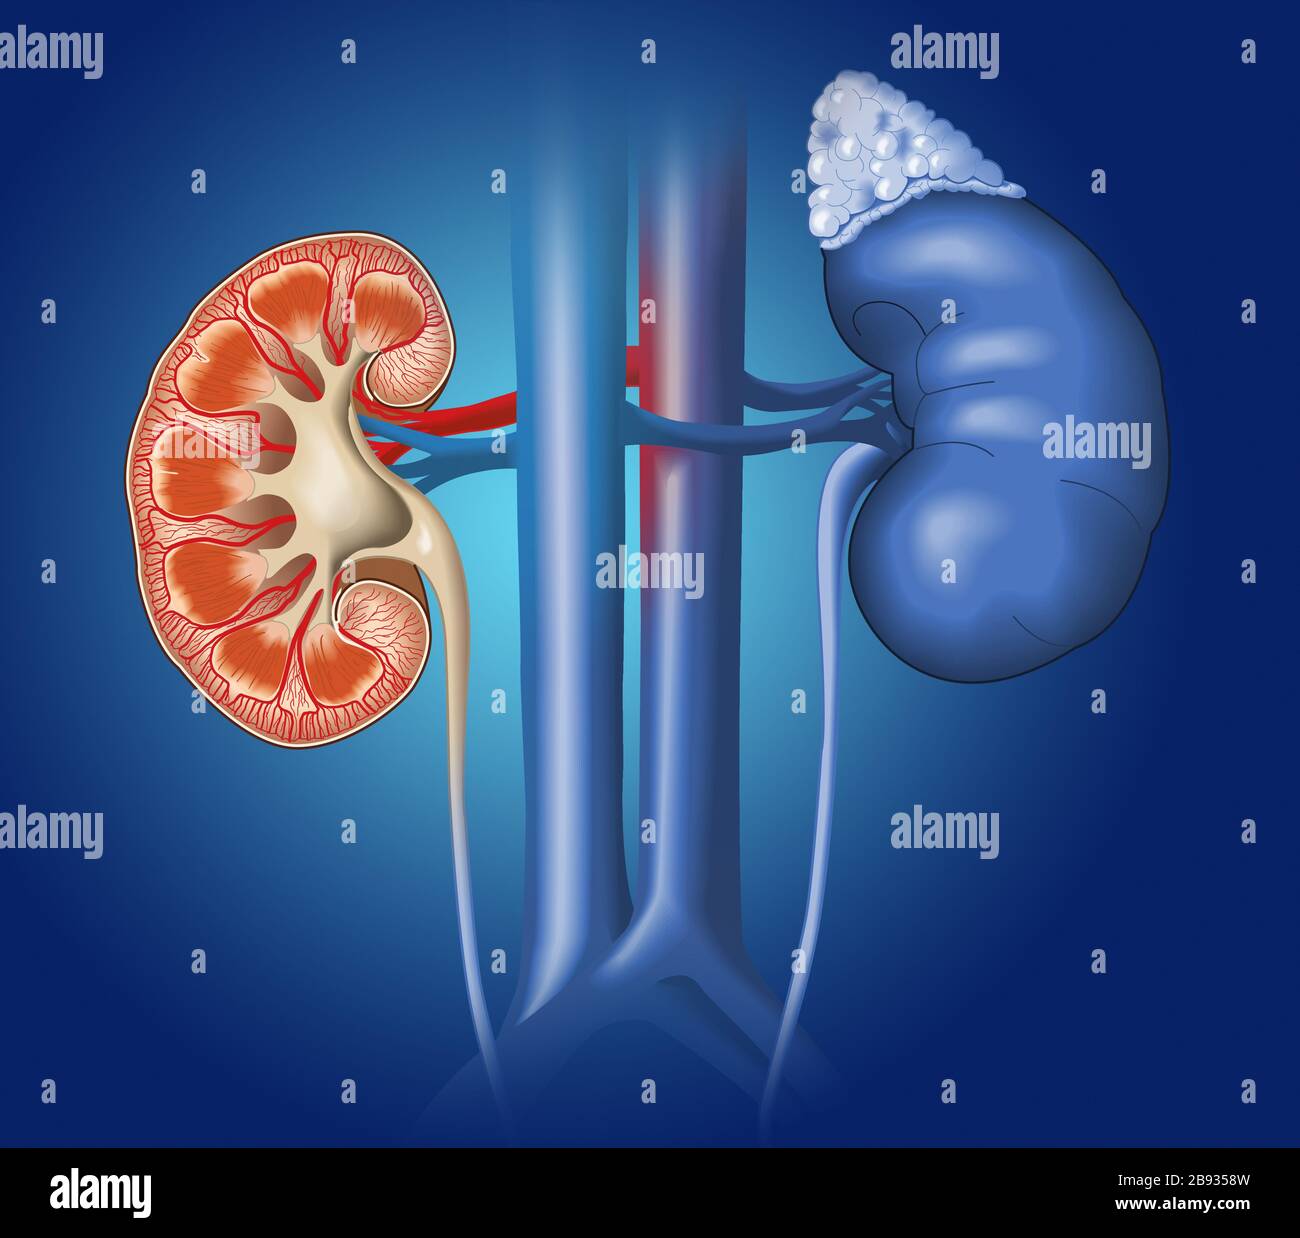 Medically illustration showing cross-section of a kidney with with inferior vena cava and descending aorta on blue background Stock Photo